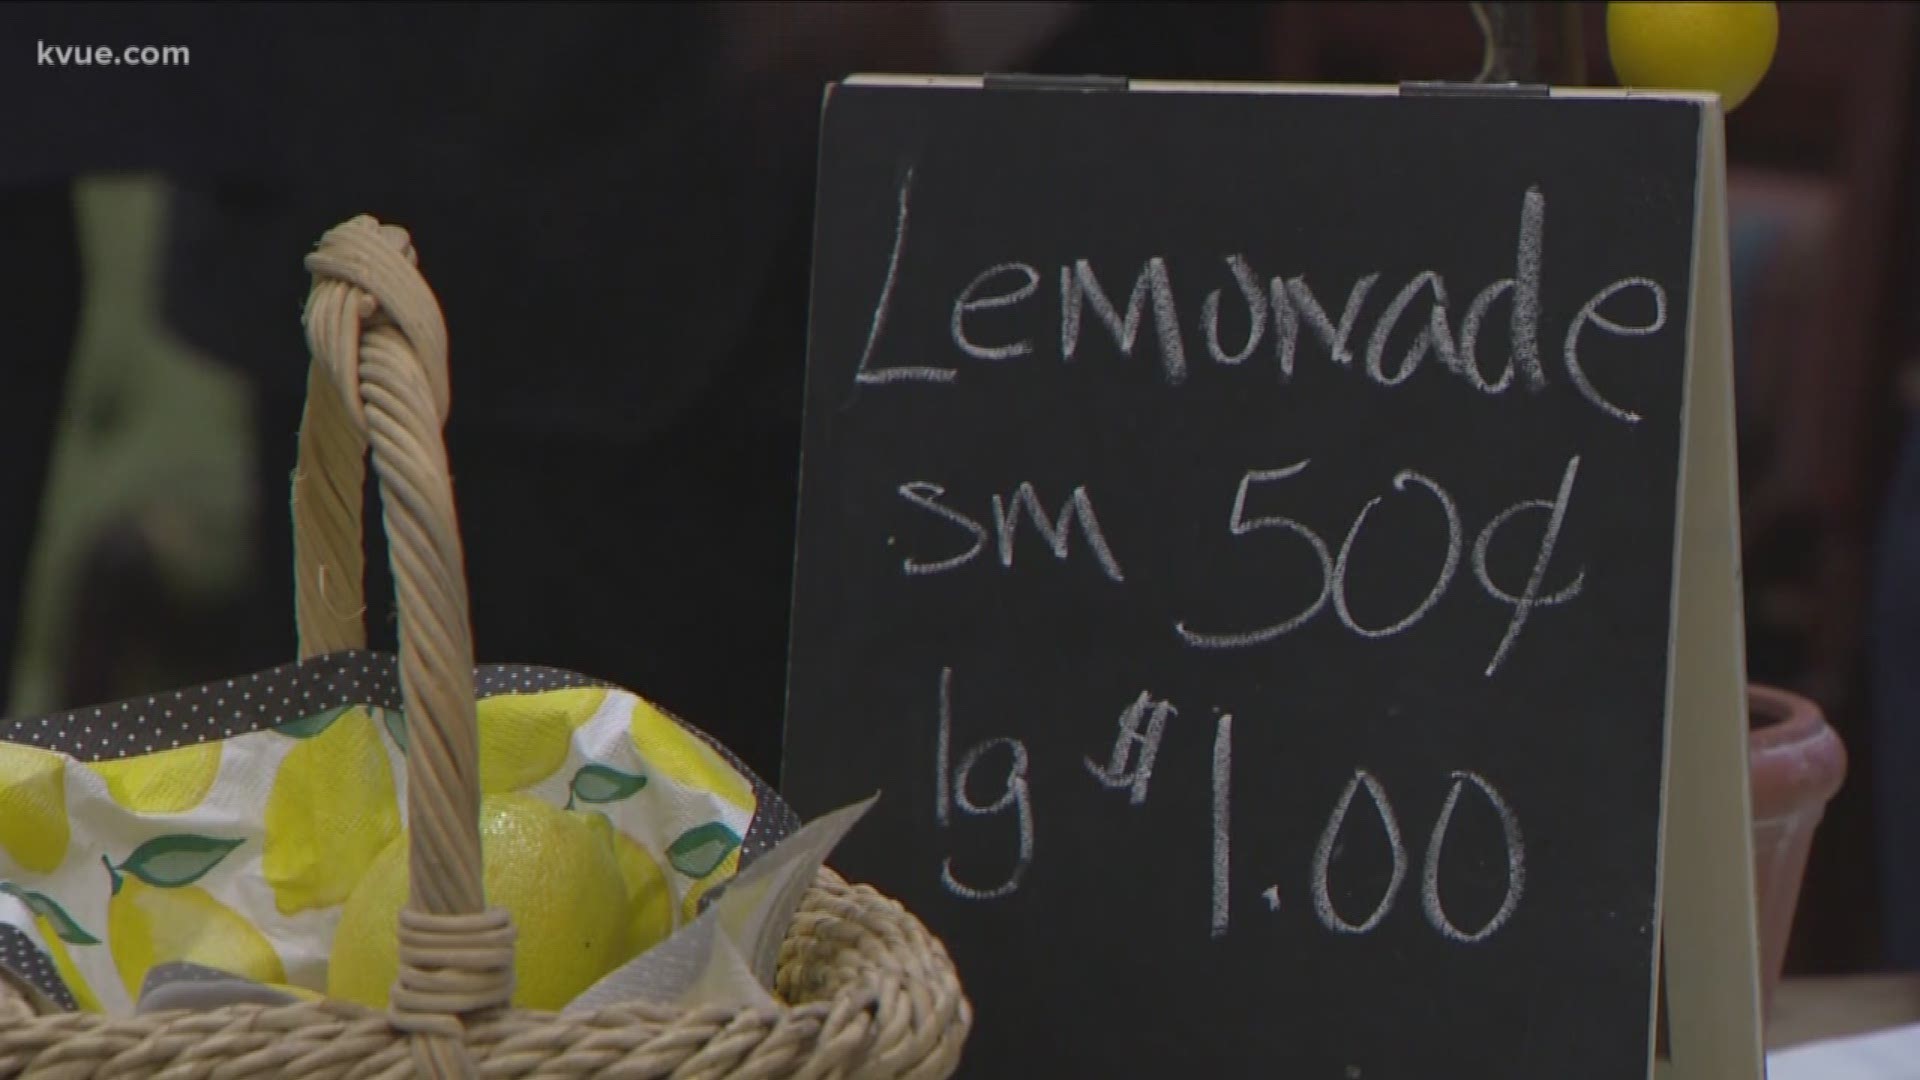 The bill does away with the permits previously needed to operate a lemonade stand.